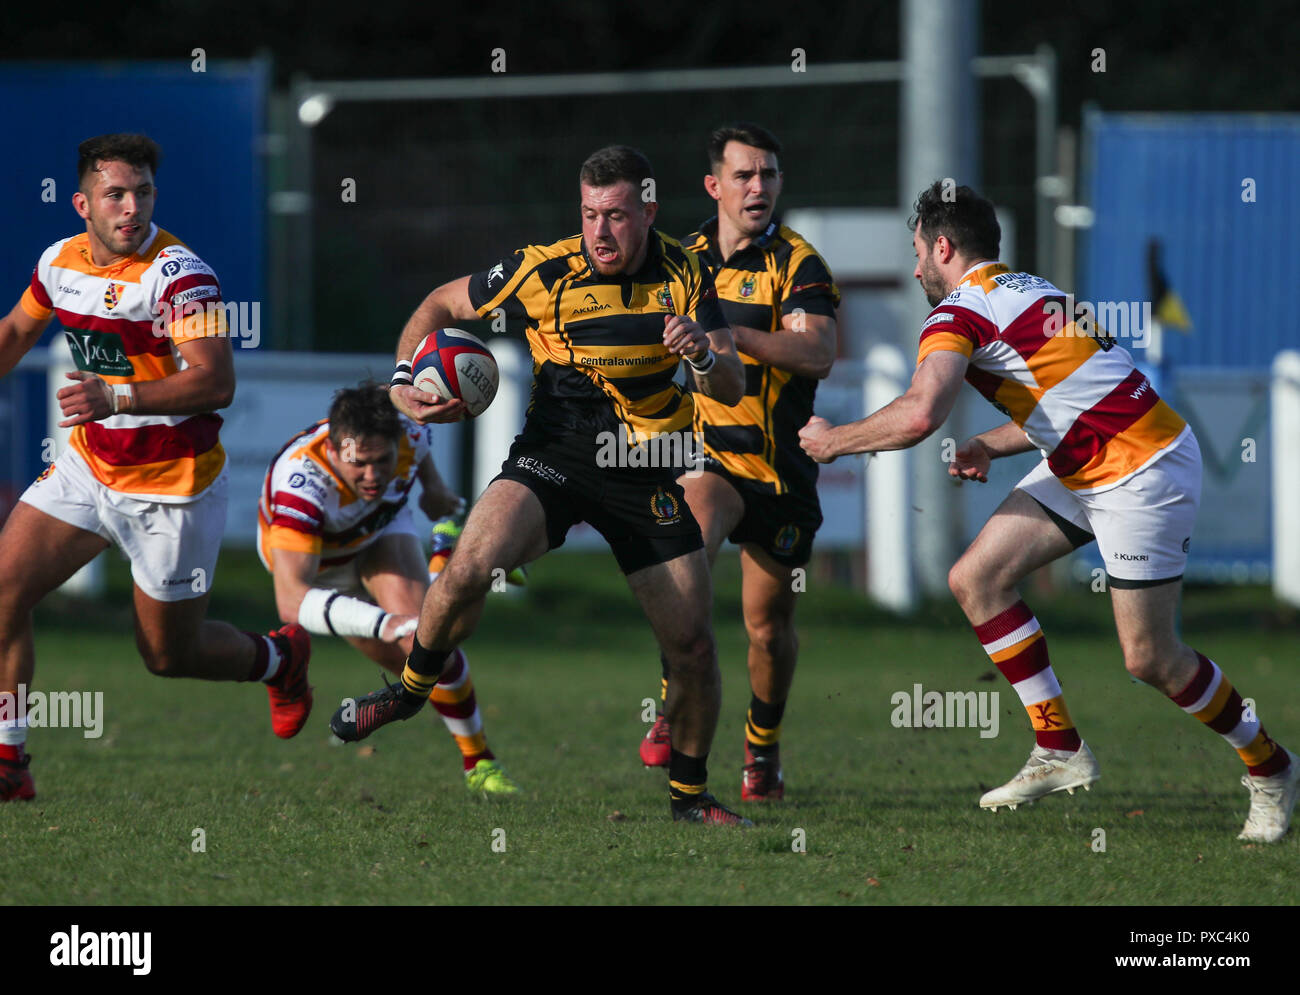 20.10.2018 Hinckley, Leicester, England. Rugby Union, Hinckley rfc v Fylde rfc.  Mitch Lamb makes a break for Hinckley during the RFU National League 2 North (NL2N) game played at the Leicester  Road Stadium.    © Phil Hutchinson / Alamy Live News Stock Photo